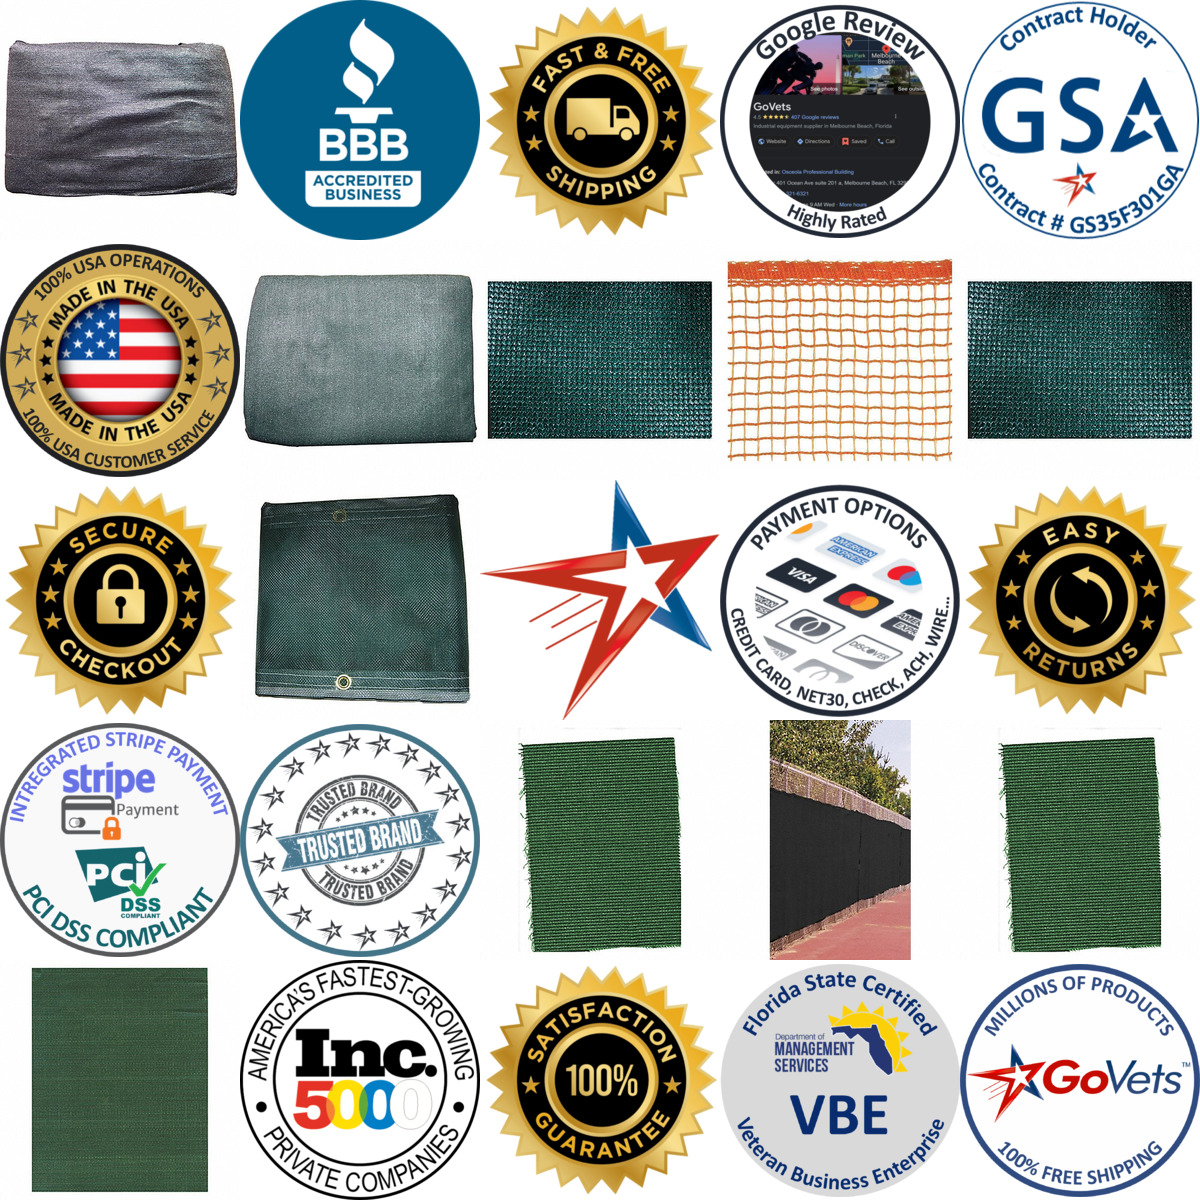 A selection of Windscreen and Fence Privacy Screens products on GoVets